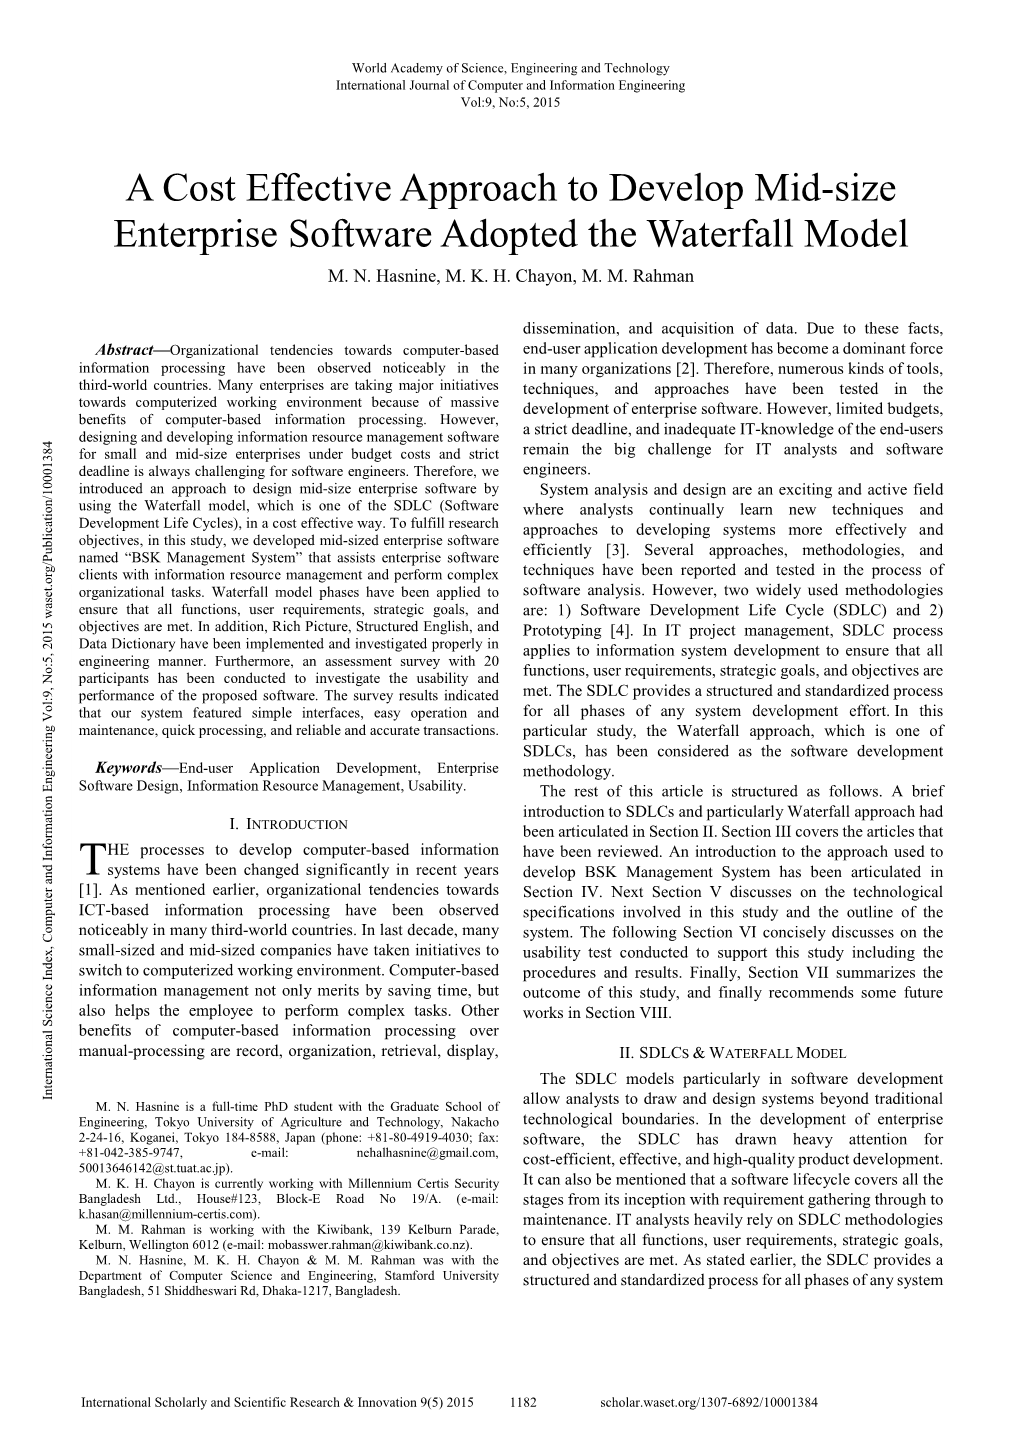 A Cost Effective Approach to Develop Mid-Size Enterprise Software Adopted the Waterfall Model M